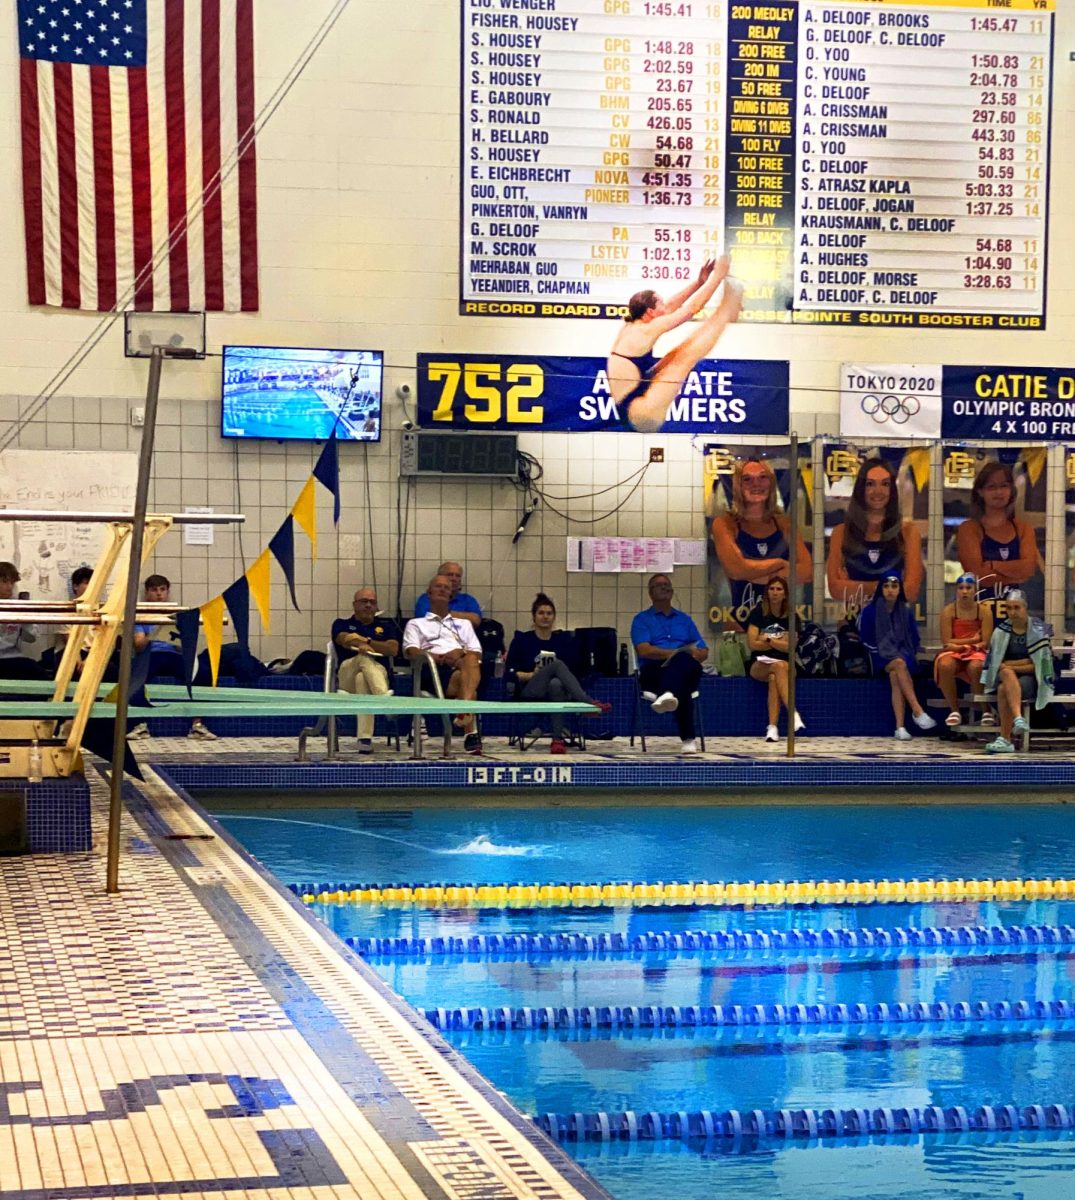  Alayna Okonoski ’24 was the representative for South in the diving competition at the meet.  She received very respectable scores of 5.5, 5.5, and 5 from the judges.